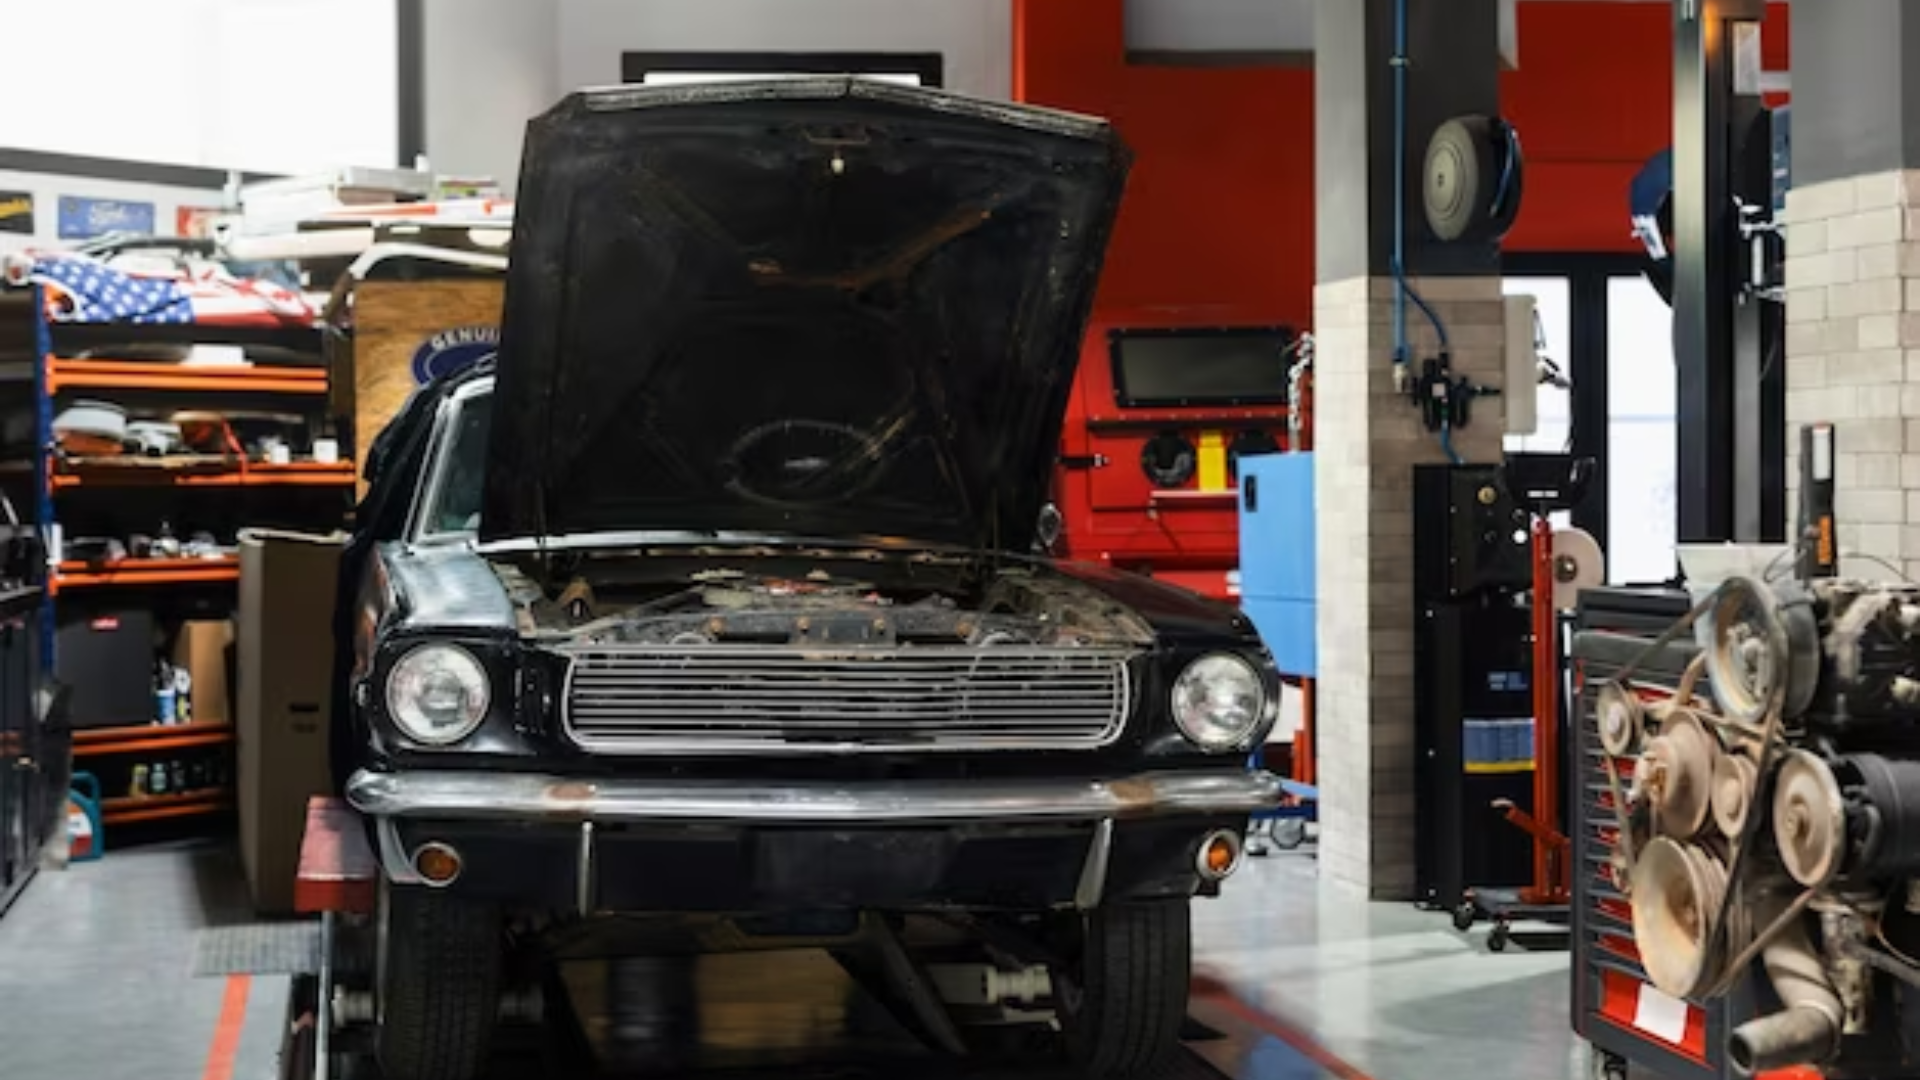 Must-Visit Car Garage in Al Quoz for Car Enthusiasts